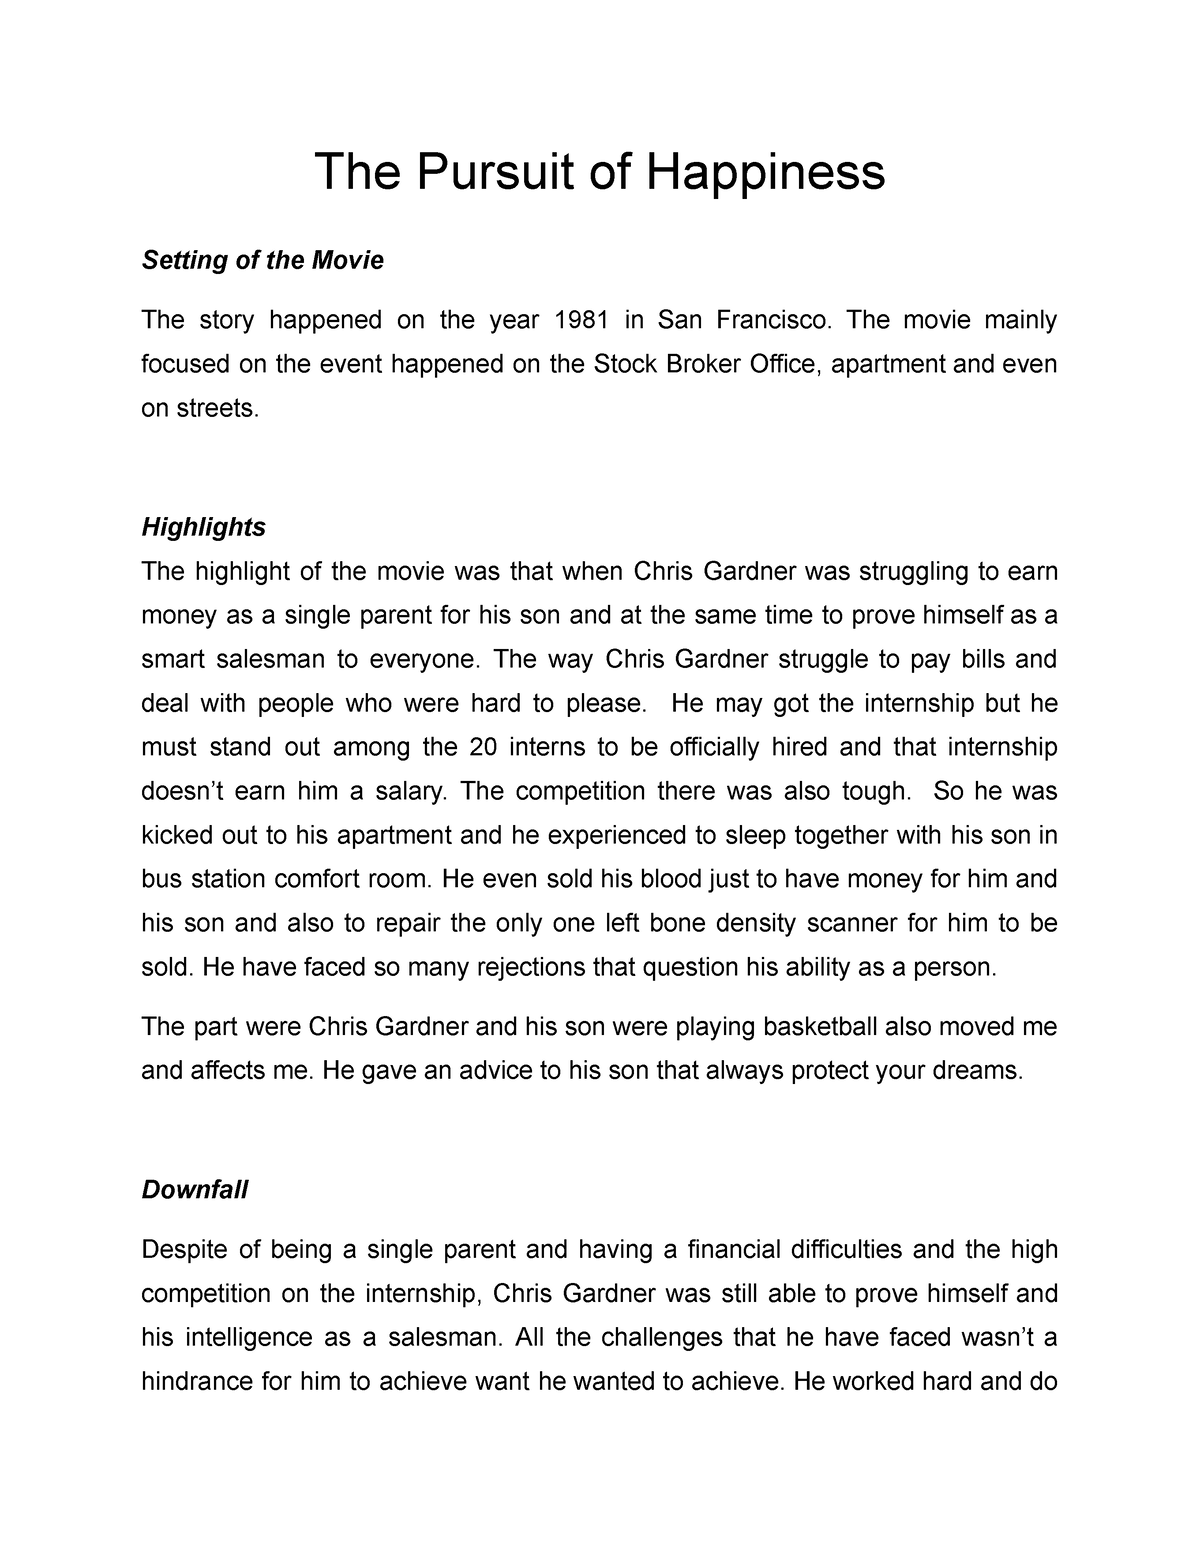 essay on the movie pursuit of happiness